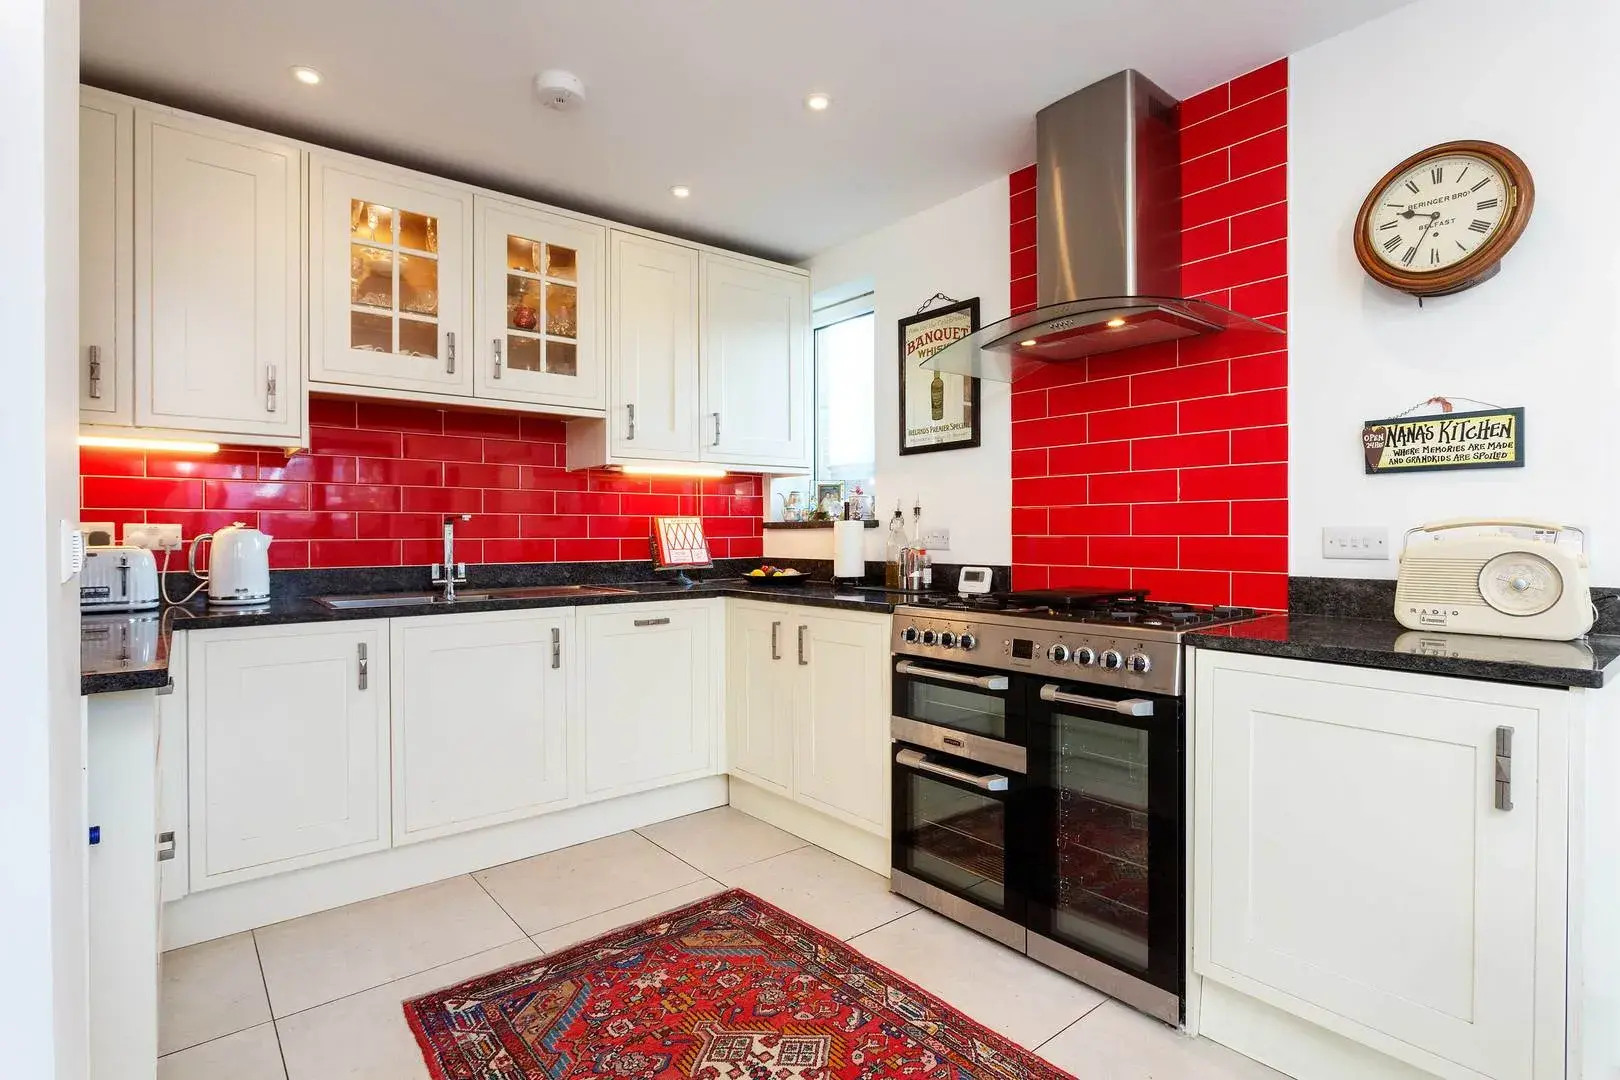 Mount Ararat Road, holiday home in Richmond, London